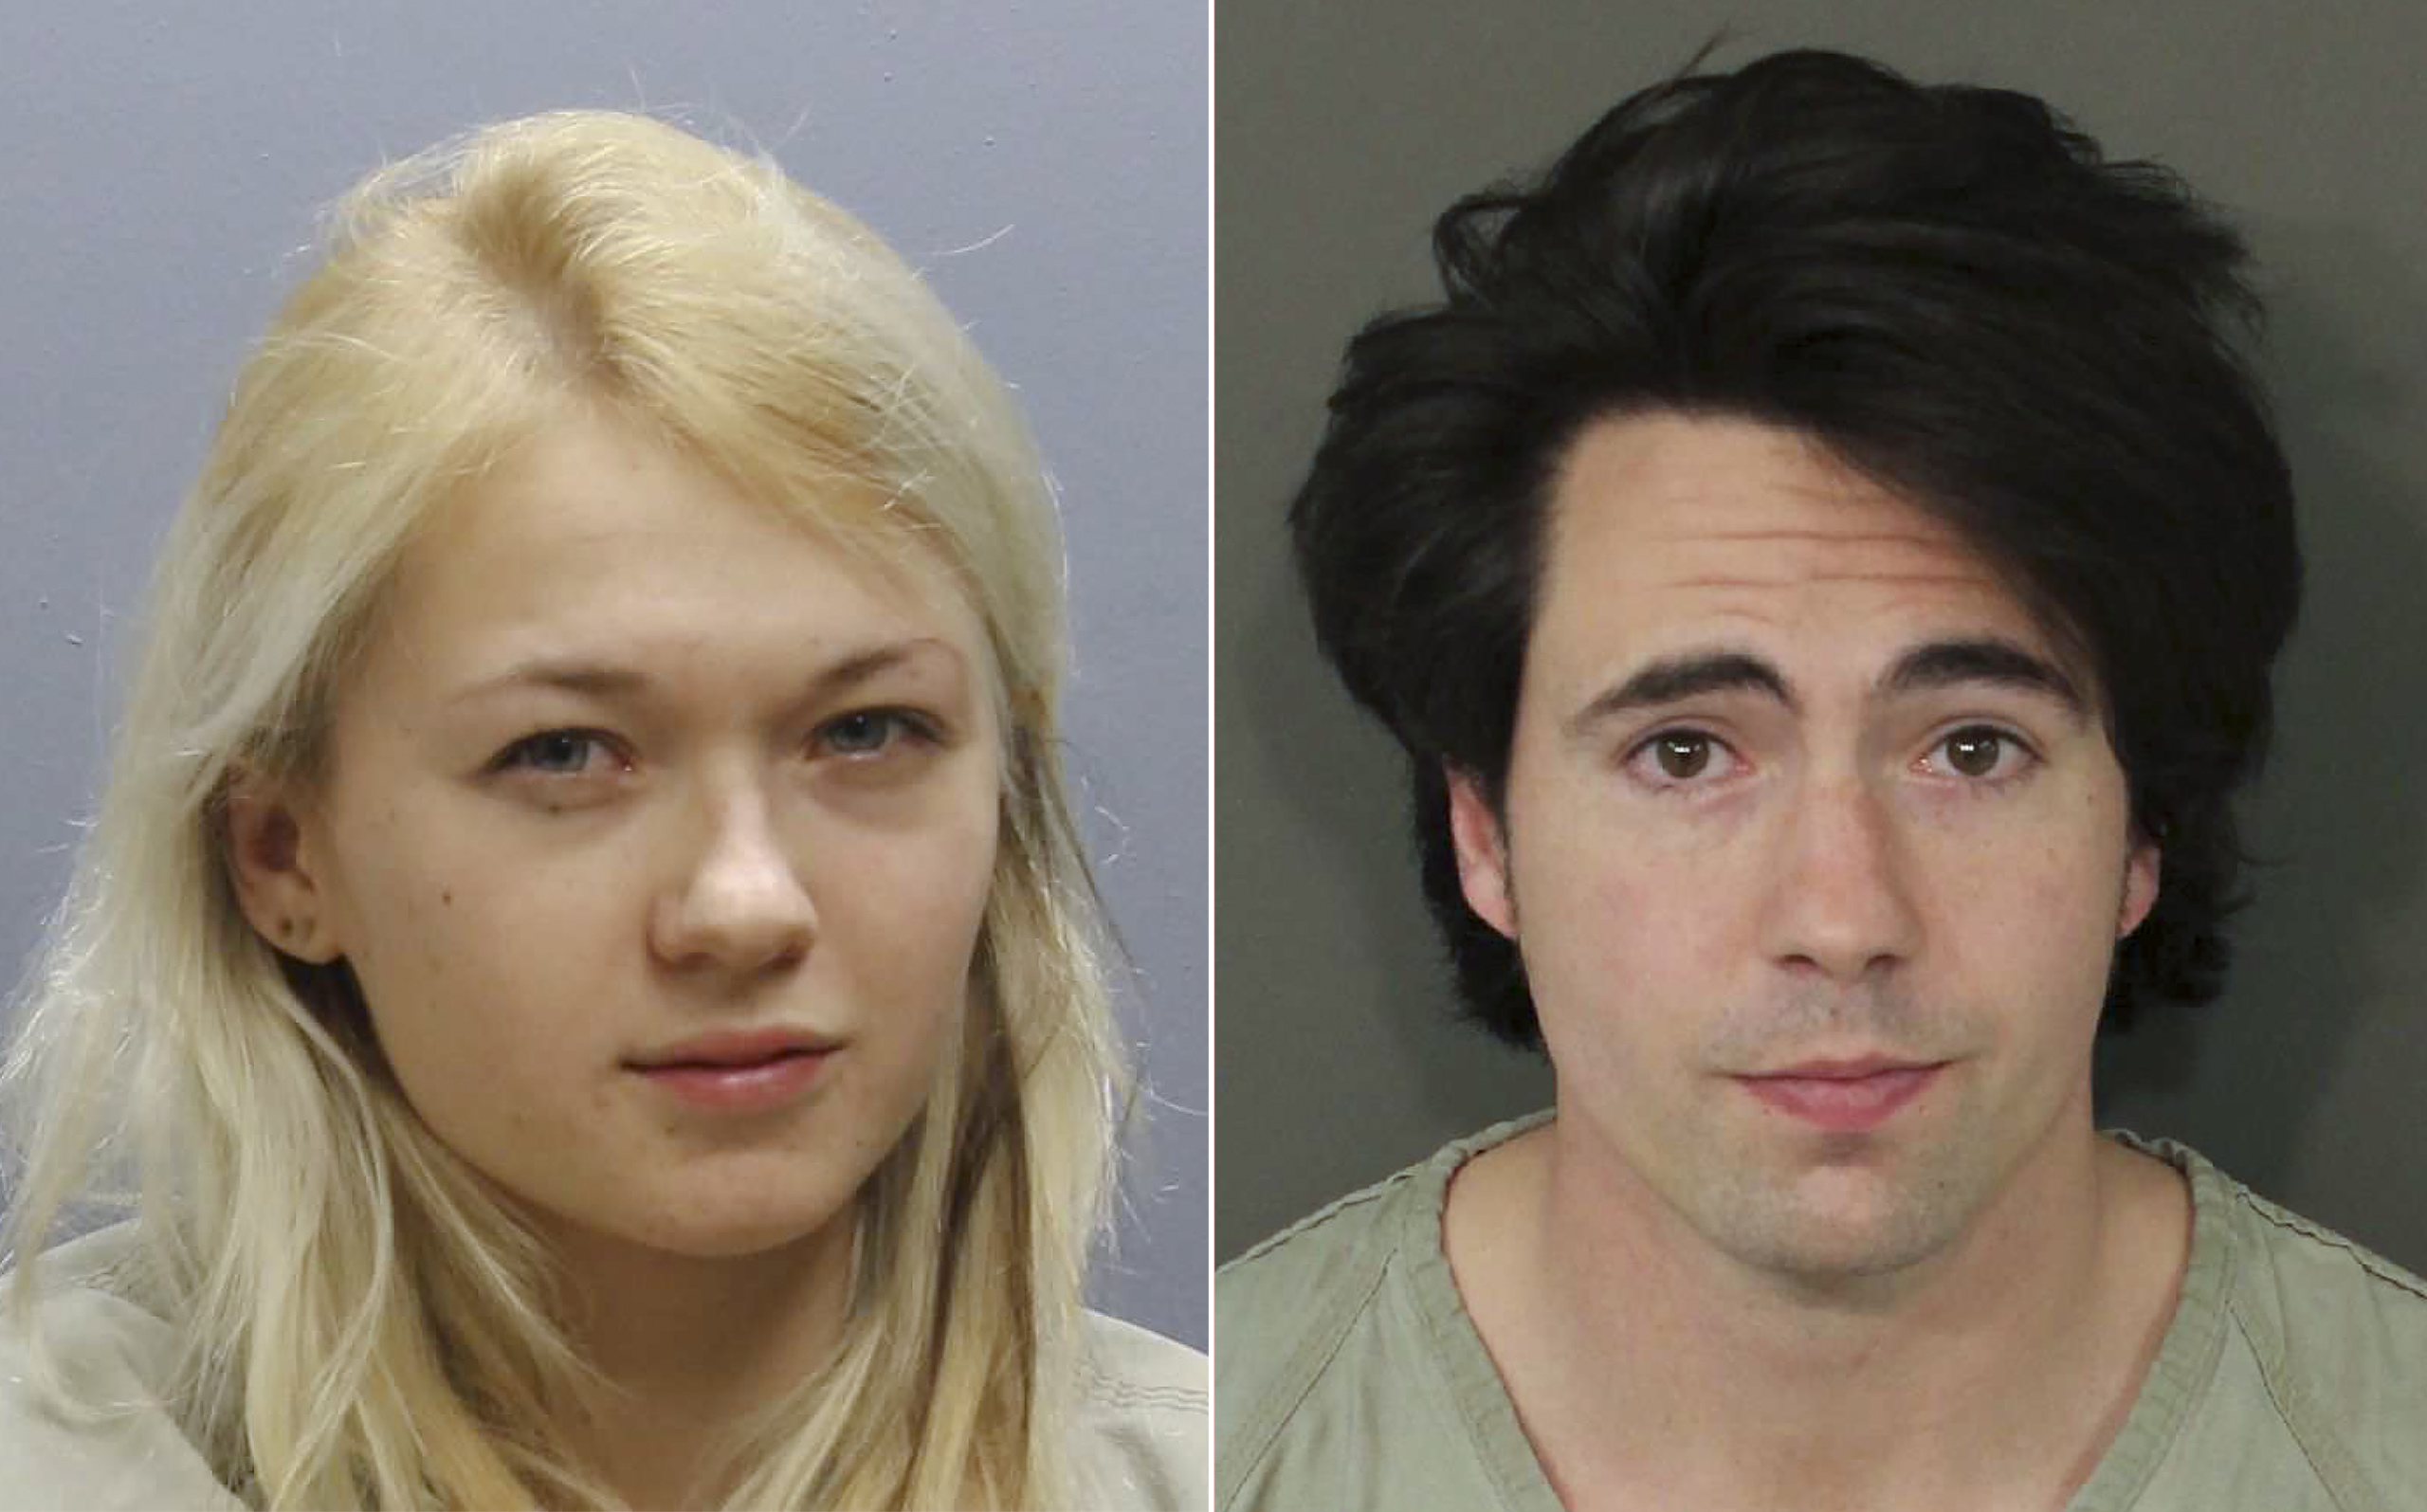 Ohio Couple Charged for Live-Streaming Sexual Assault Online Time picture pic picture